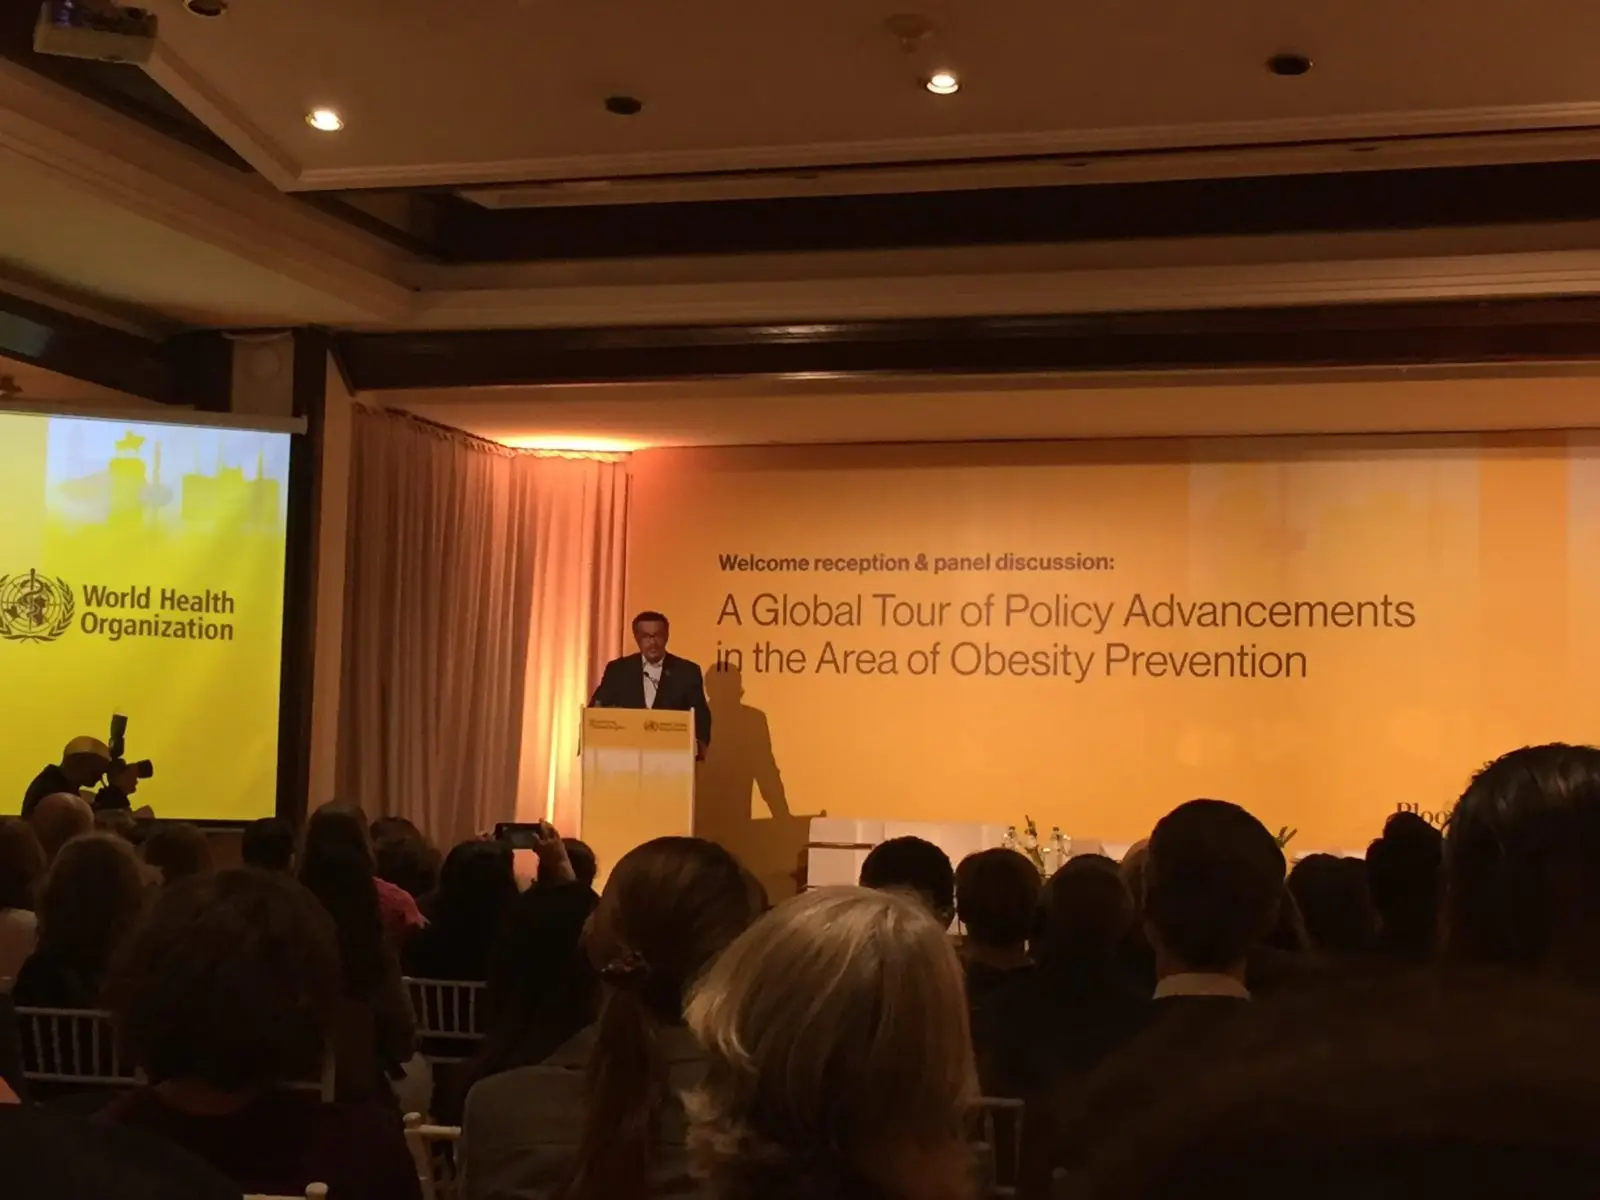 Dr. Tedros, WHO Director-General speaking on stage